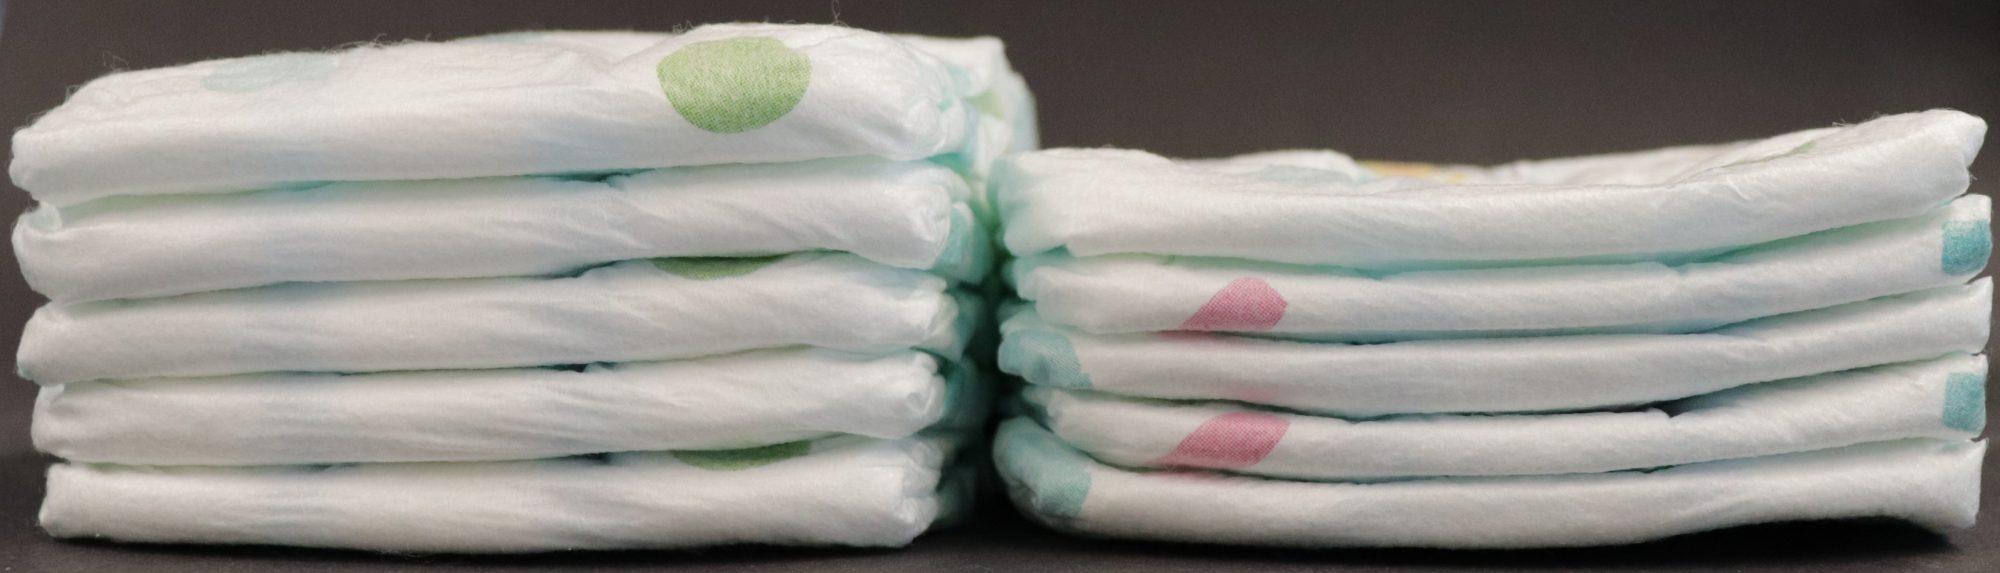 sanitary napkins, absorbent hygiene products